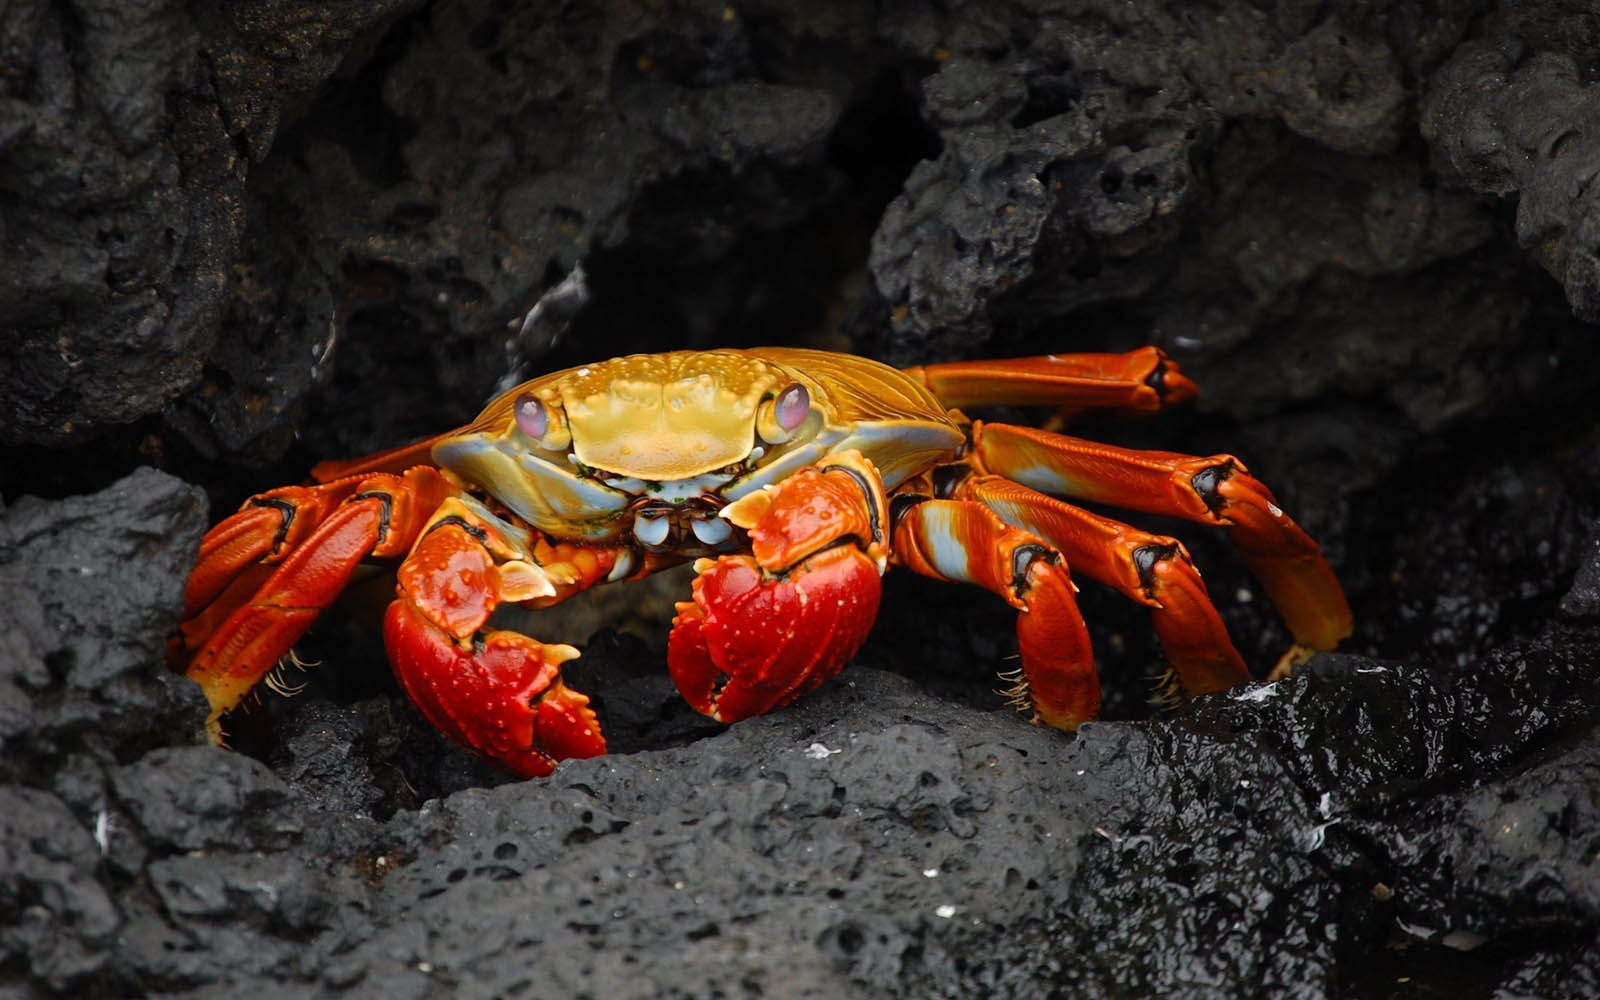 Tag Crab Wallpaper Background Photos Image And Pictures For